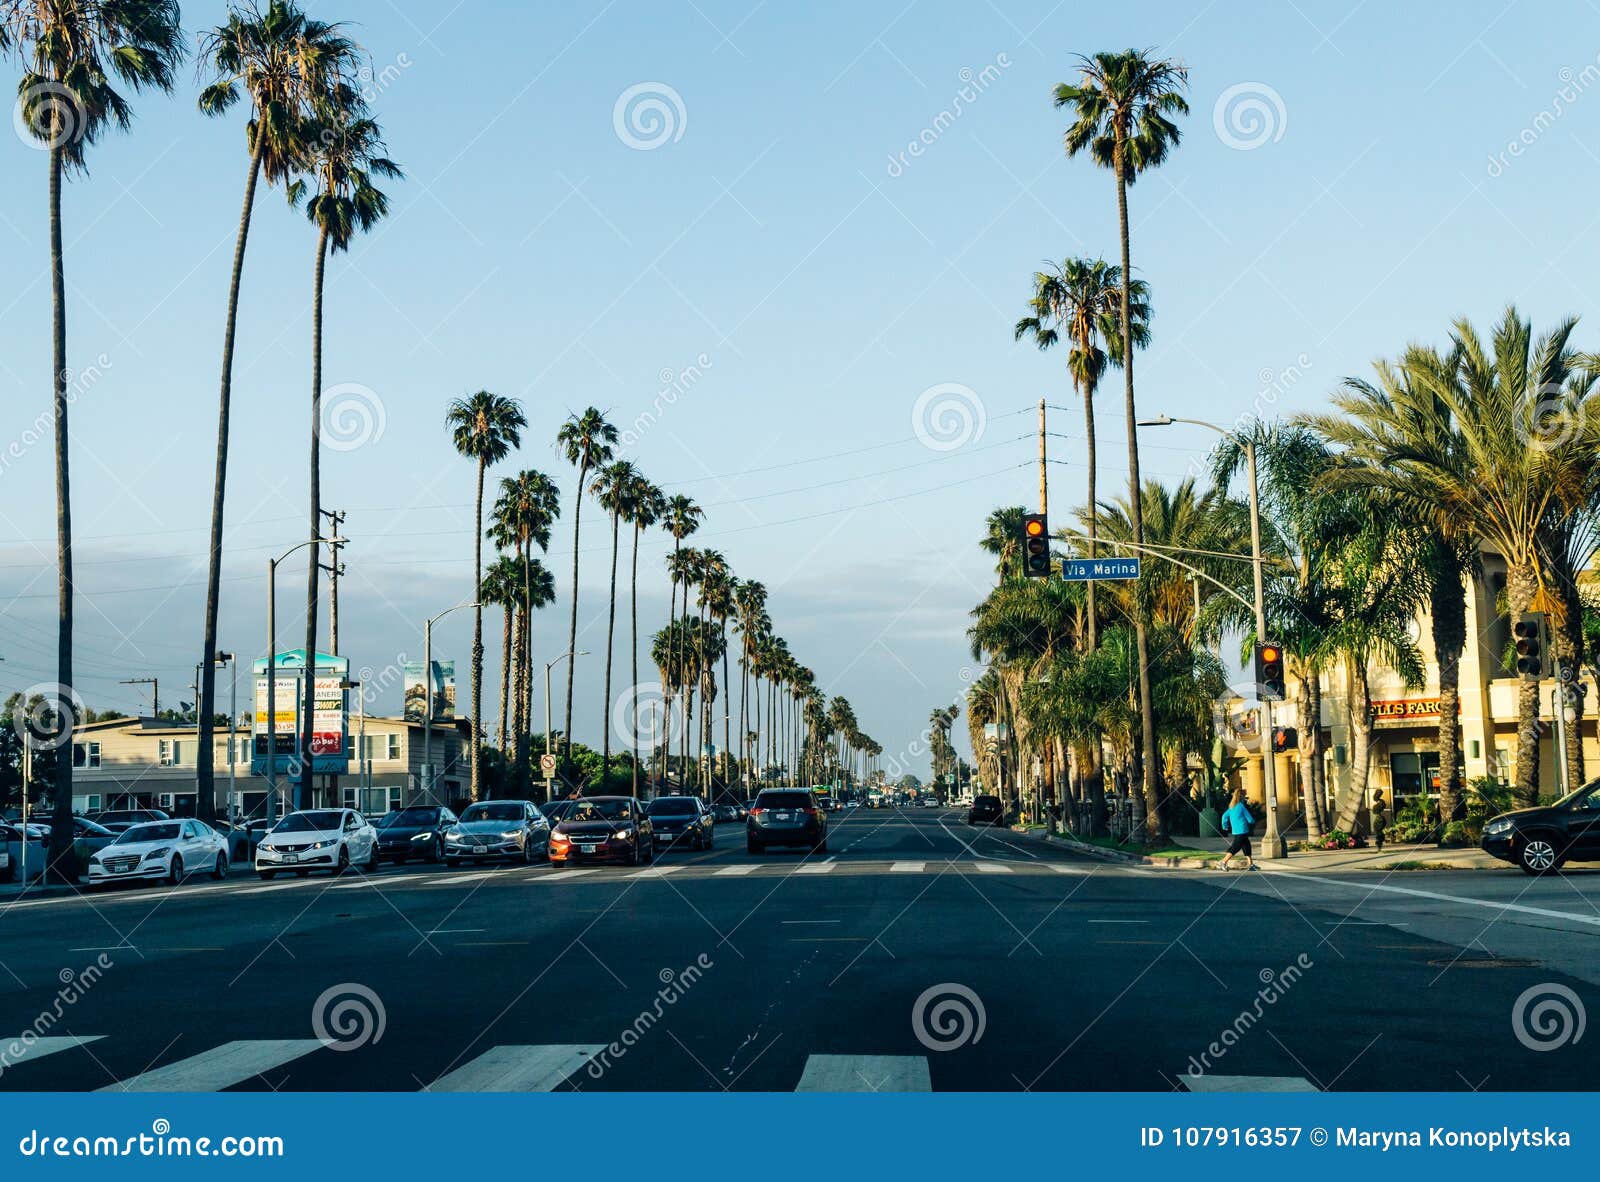 Road To the Pier of Santa Monica. a Trip To Los Angeles, California ...